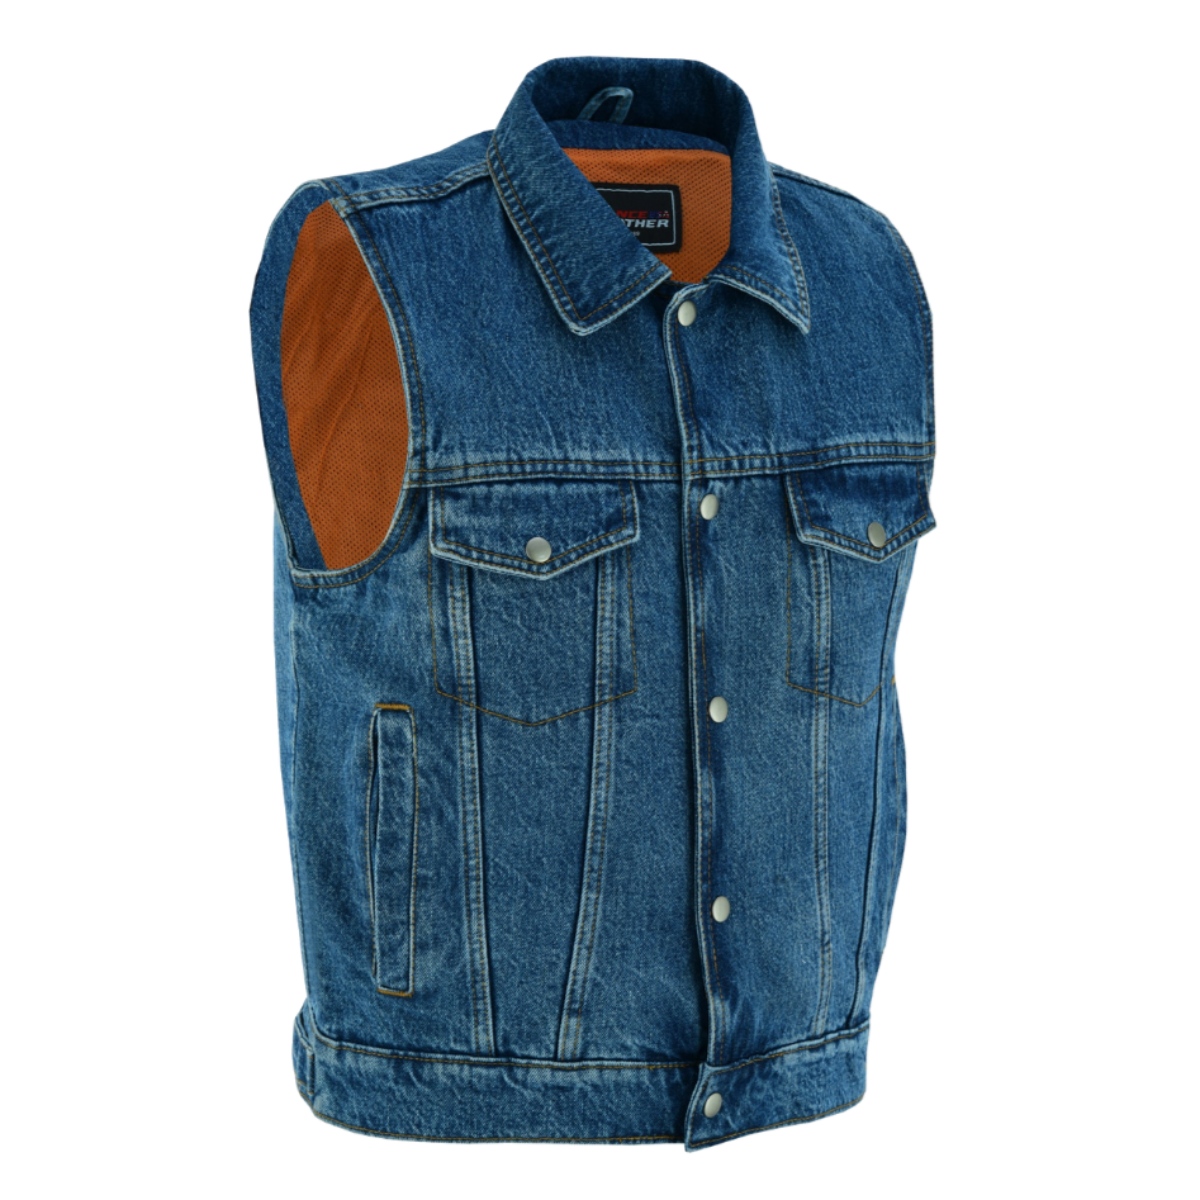 A Vance Leather Men's Denim Vest with Collar with an adjustable bottom on a white background.